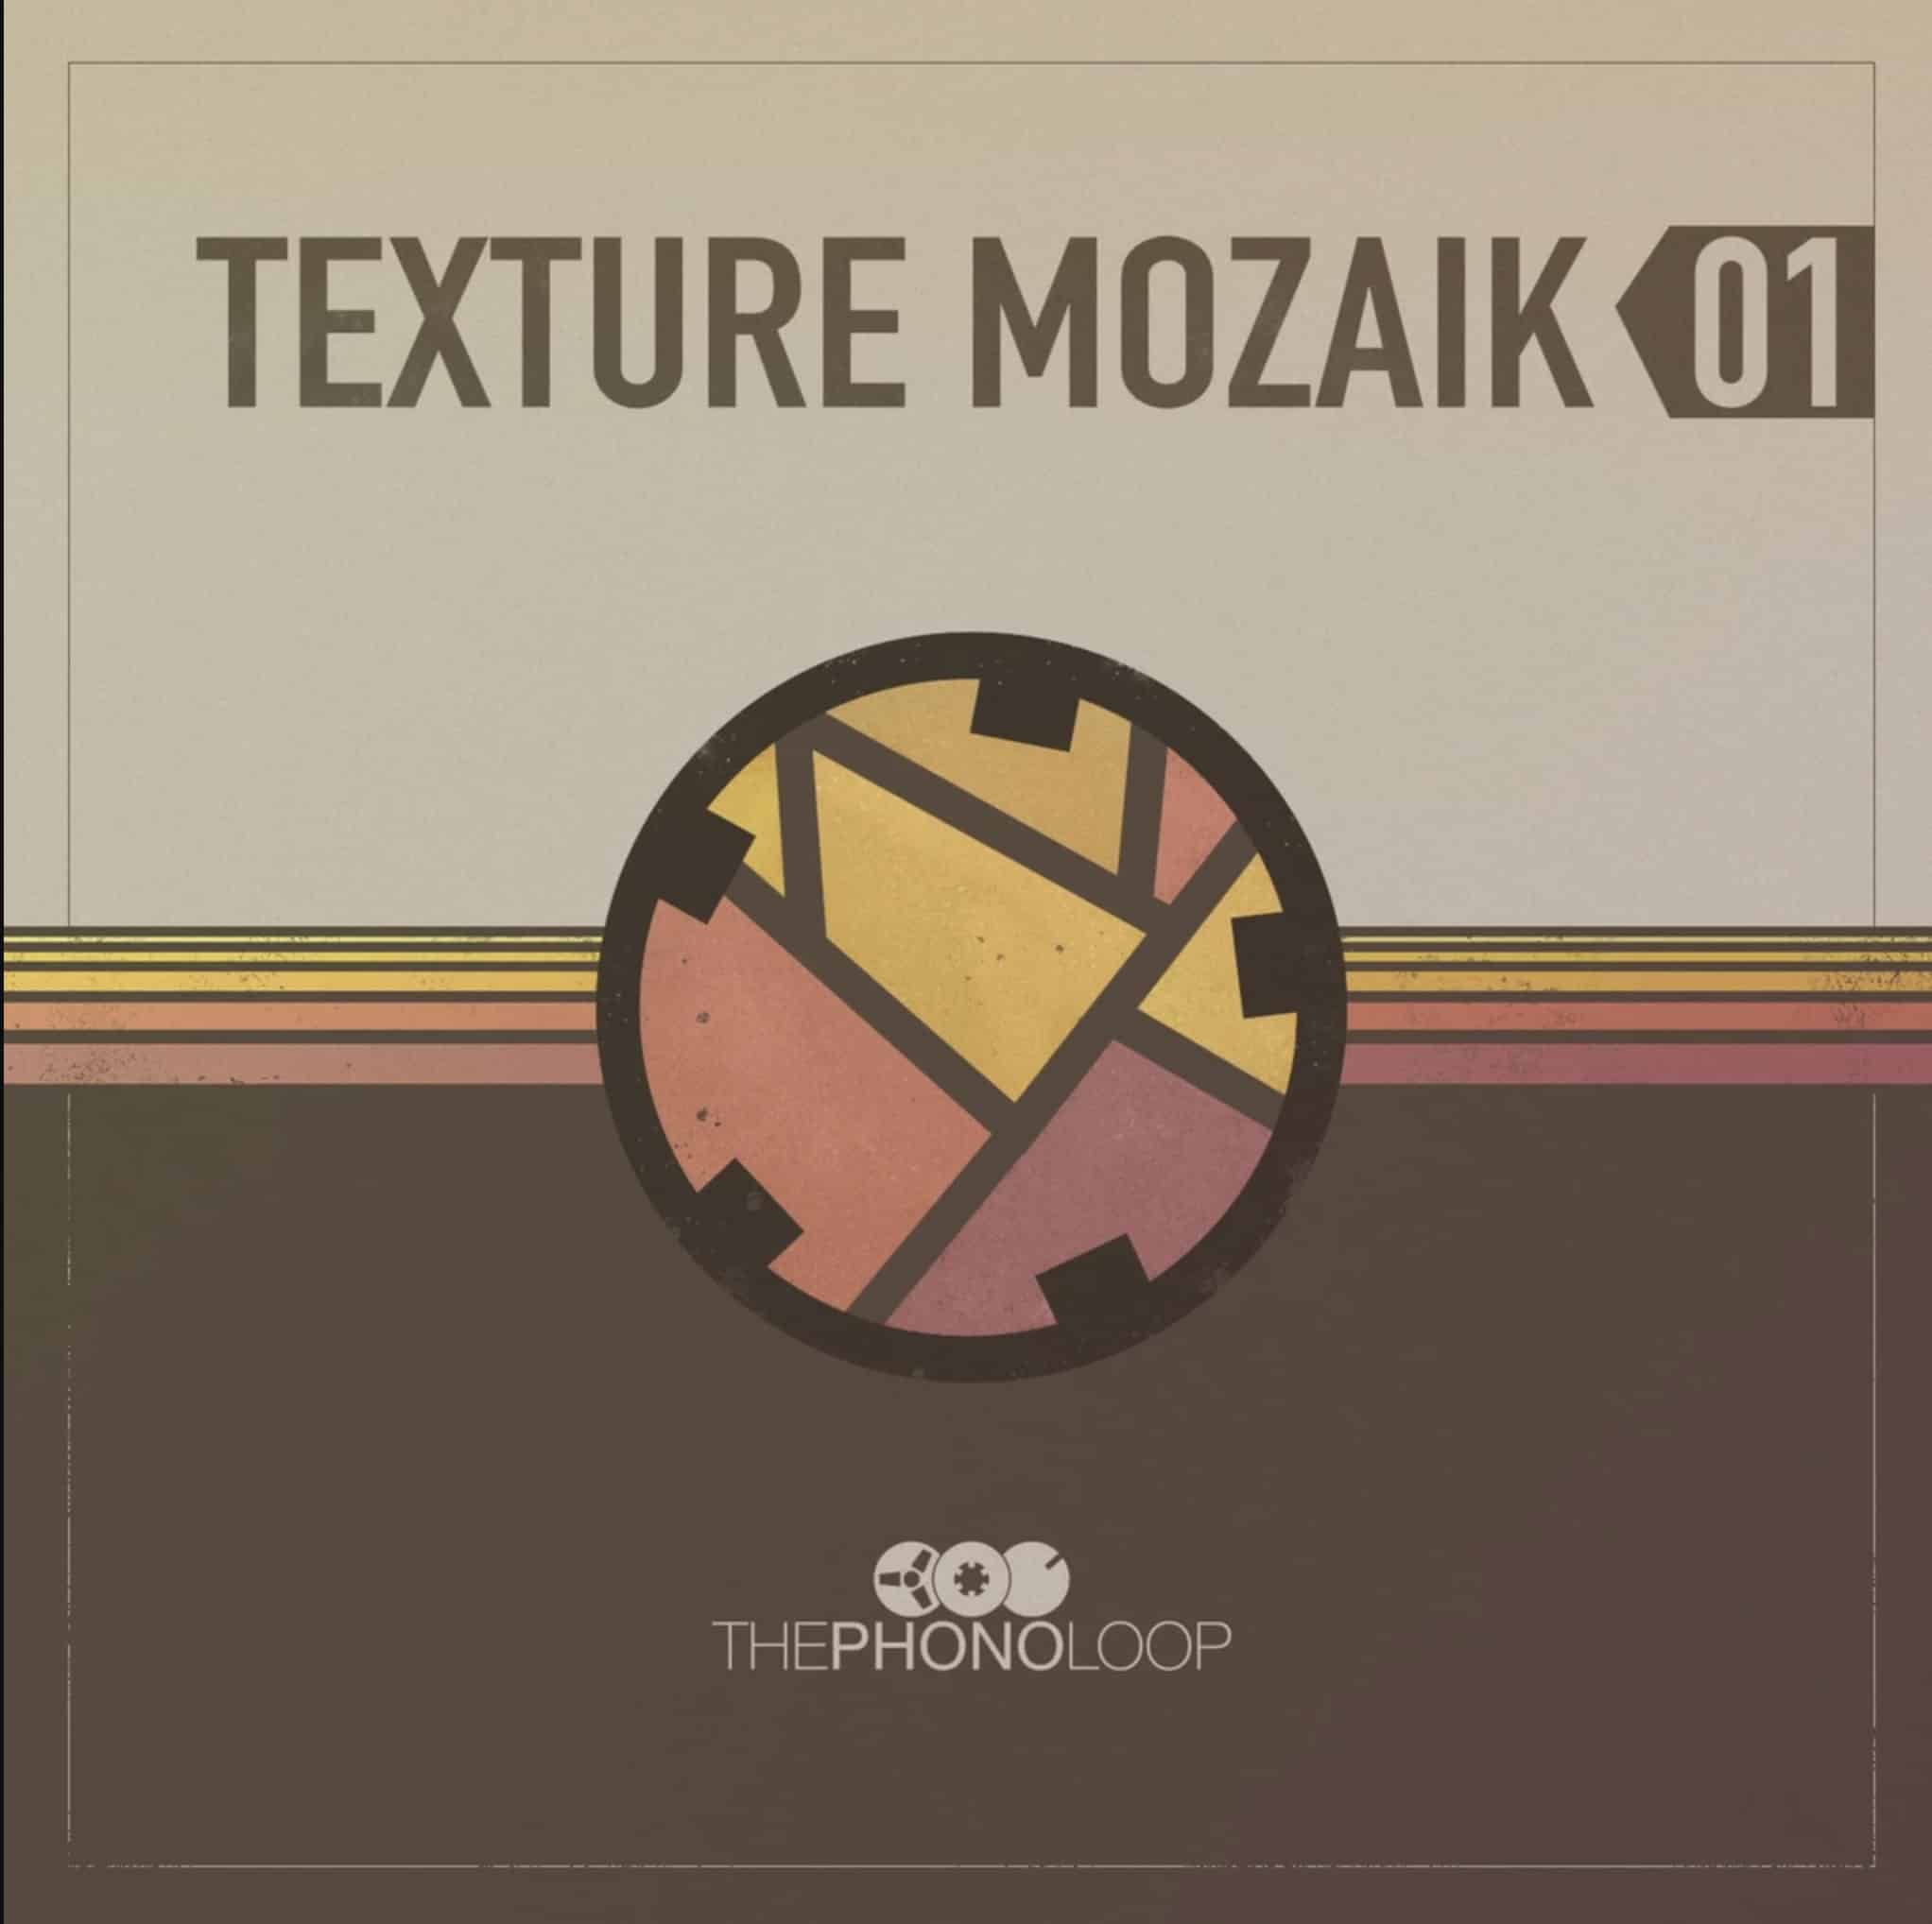 Texture Mozaik.01 updated to Version 1.02